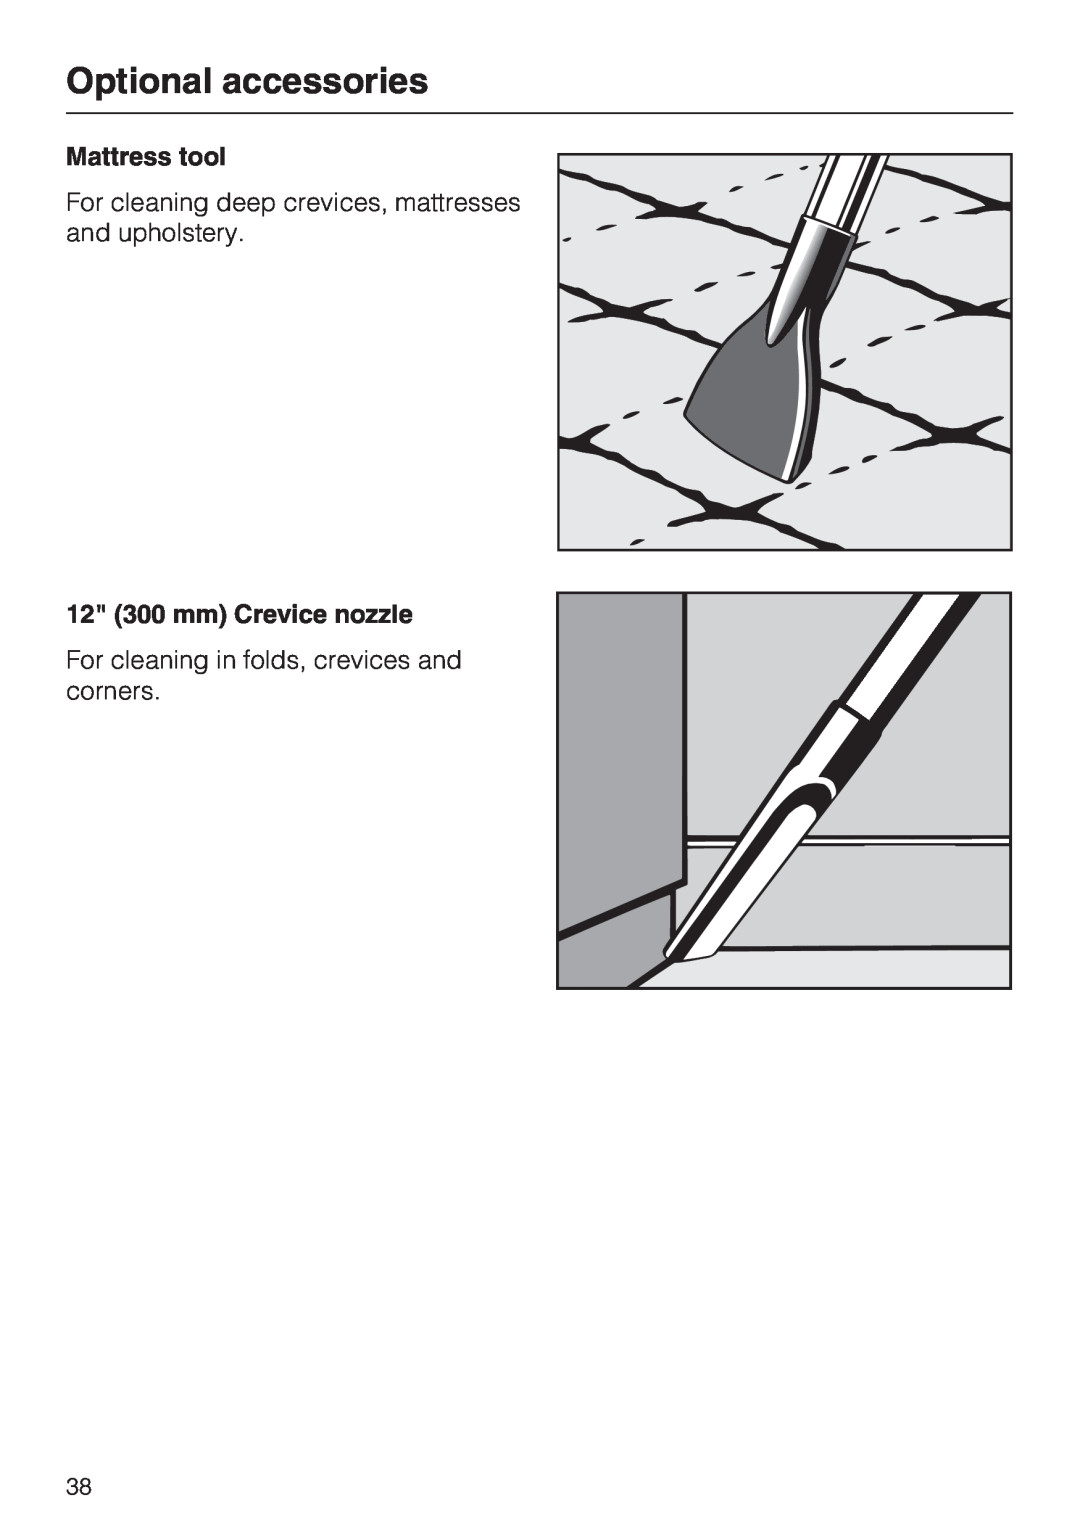 Miele S 700 Optional accessories, Mattress tool, 12 300 mm Crevice nozzle, For cleaning in folds, crevices and corners 